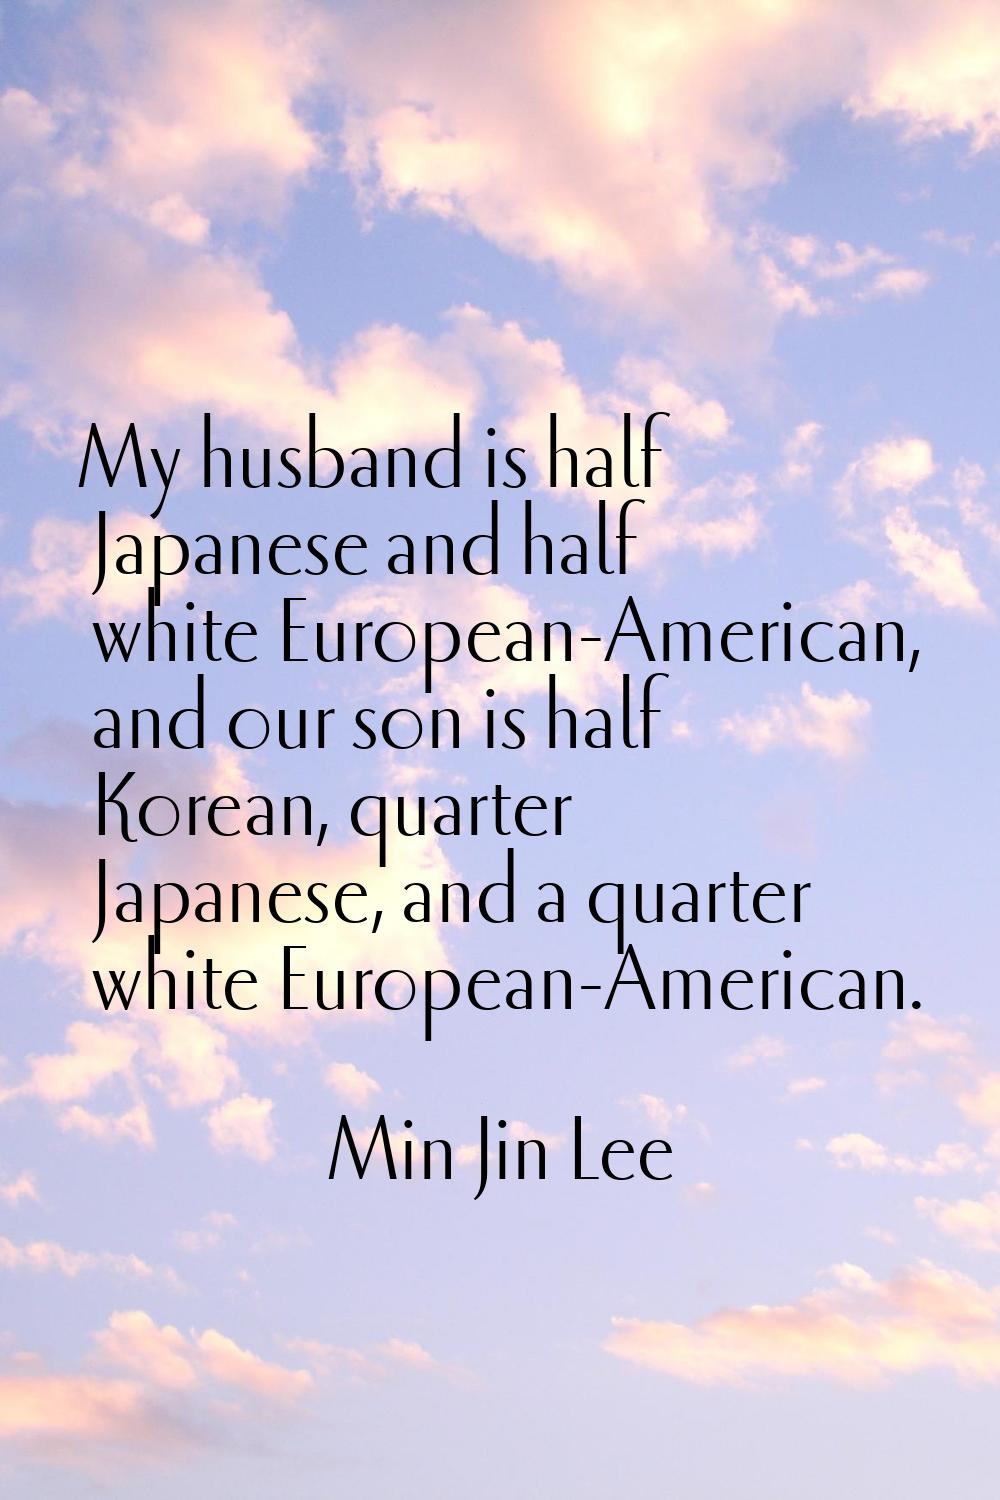 My husband is half Japanese and half white European-American, and our son is half Korean, quarter J